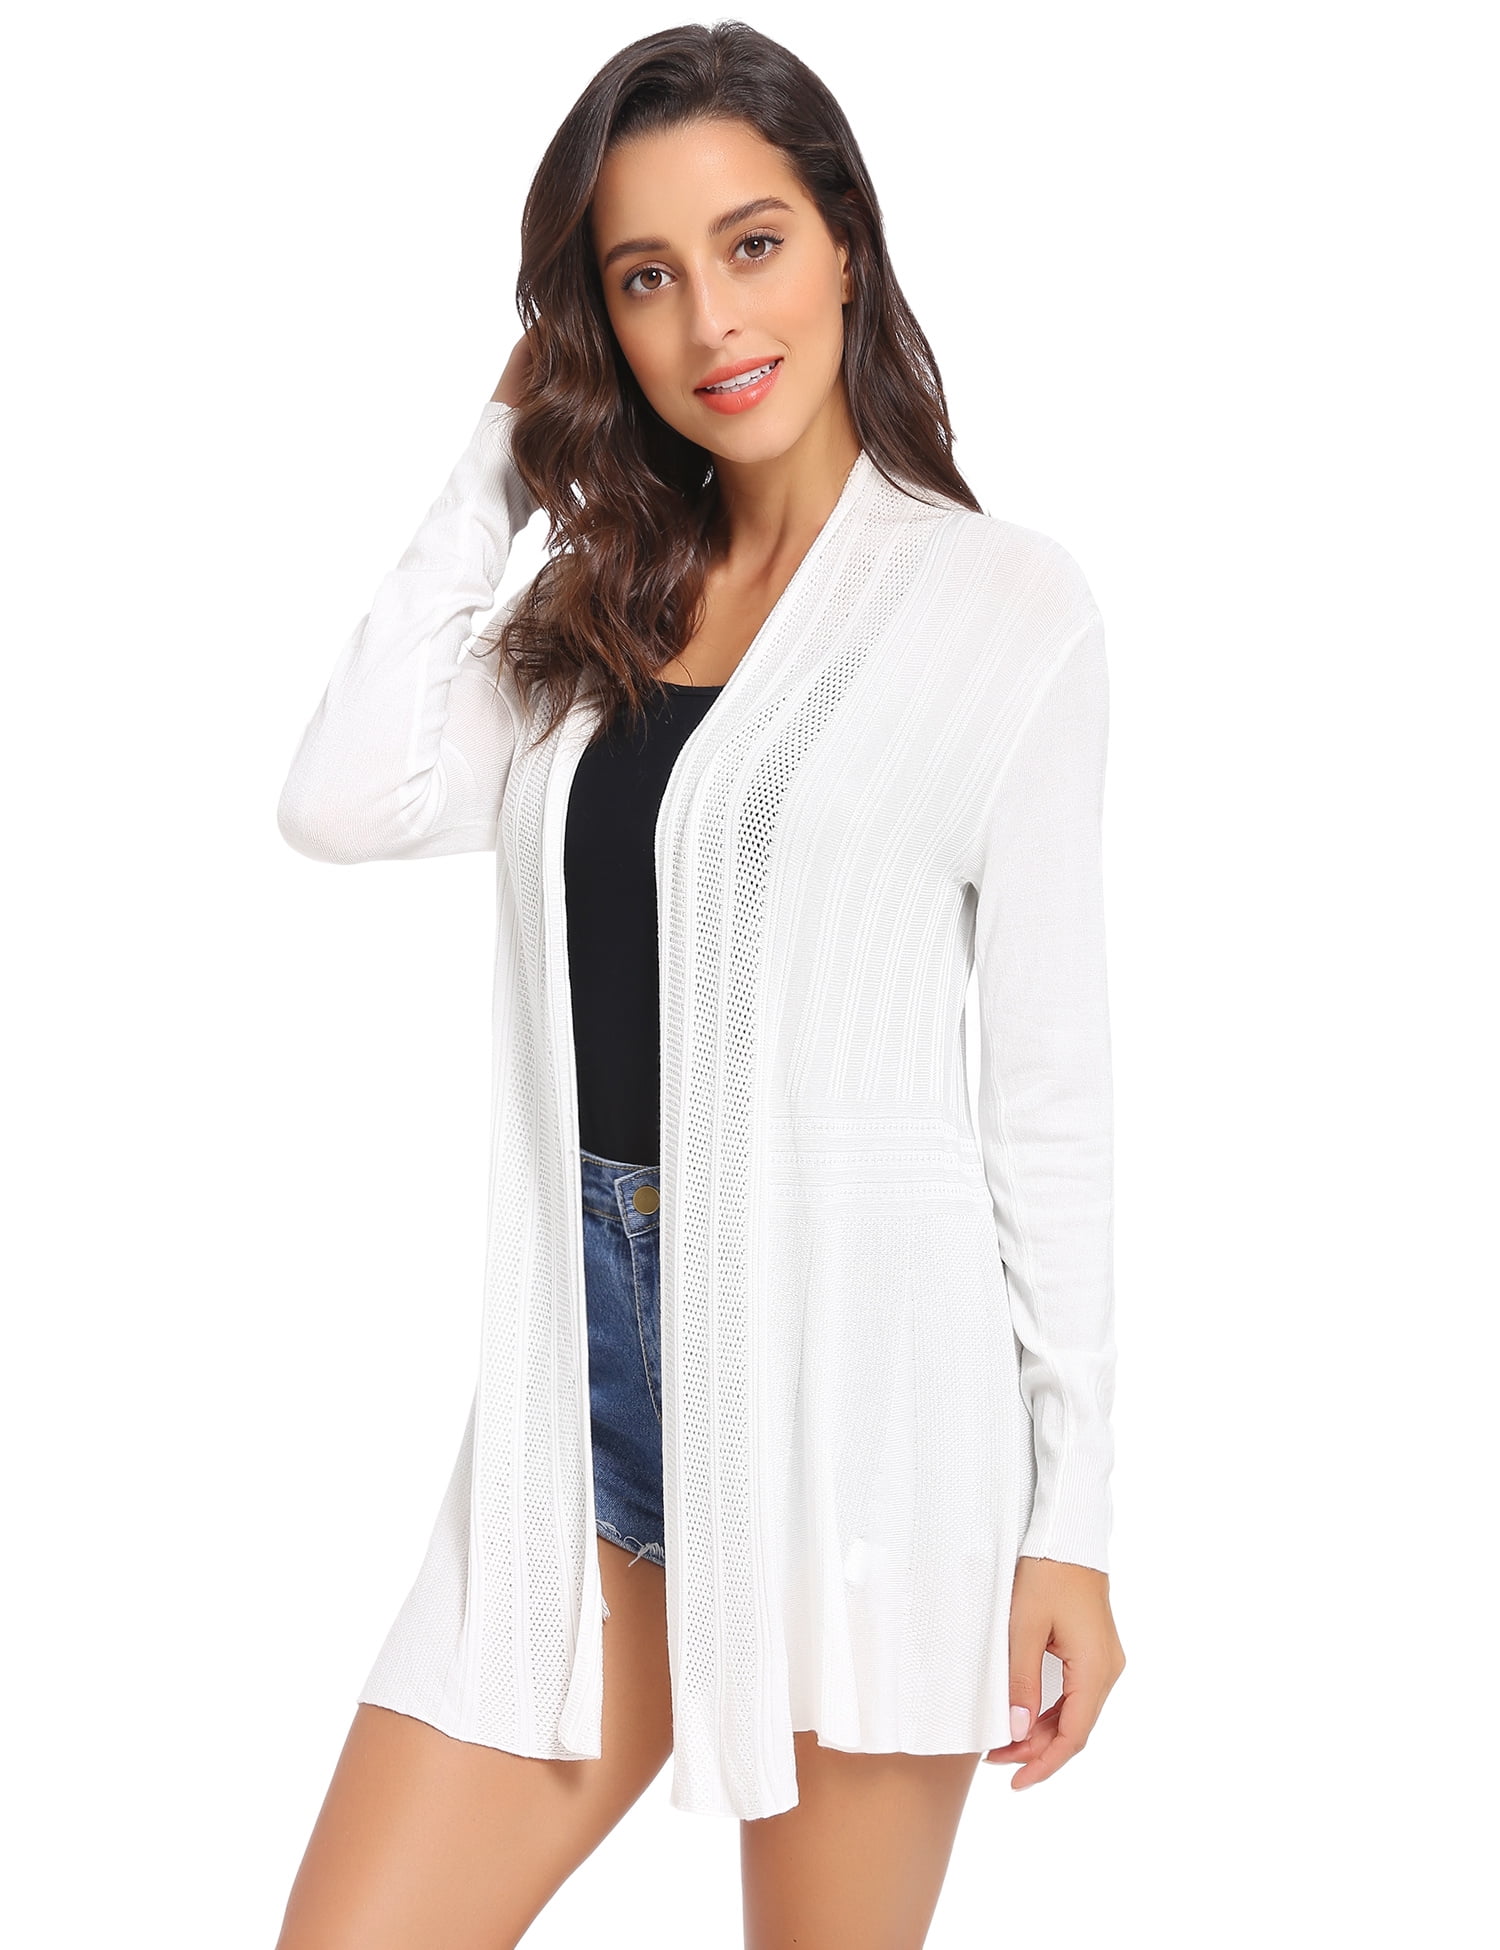 iClosam Women Casual Cardigan Knitted Open Front Long Sleeve Mid-Length Warm Cardigan Sweater 